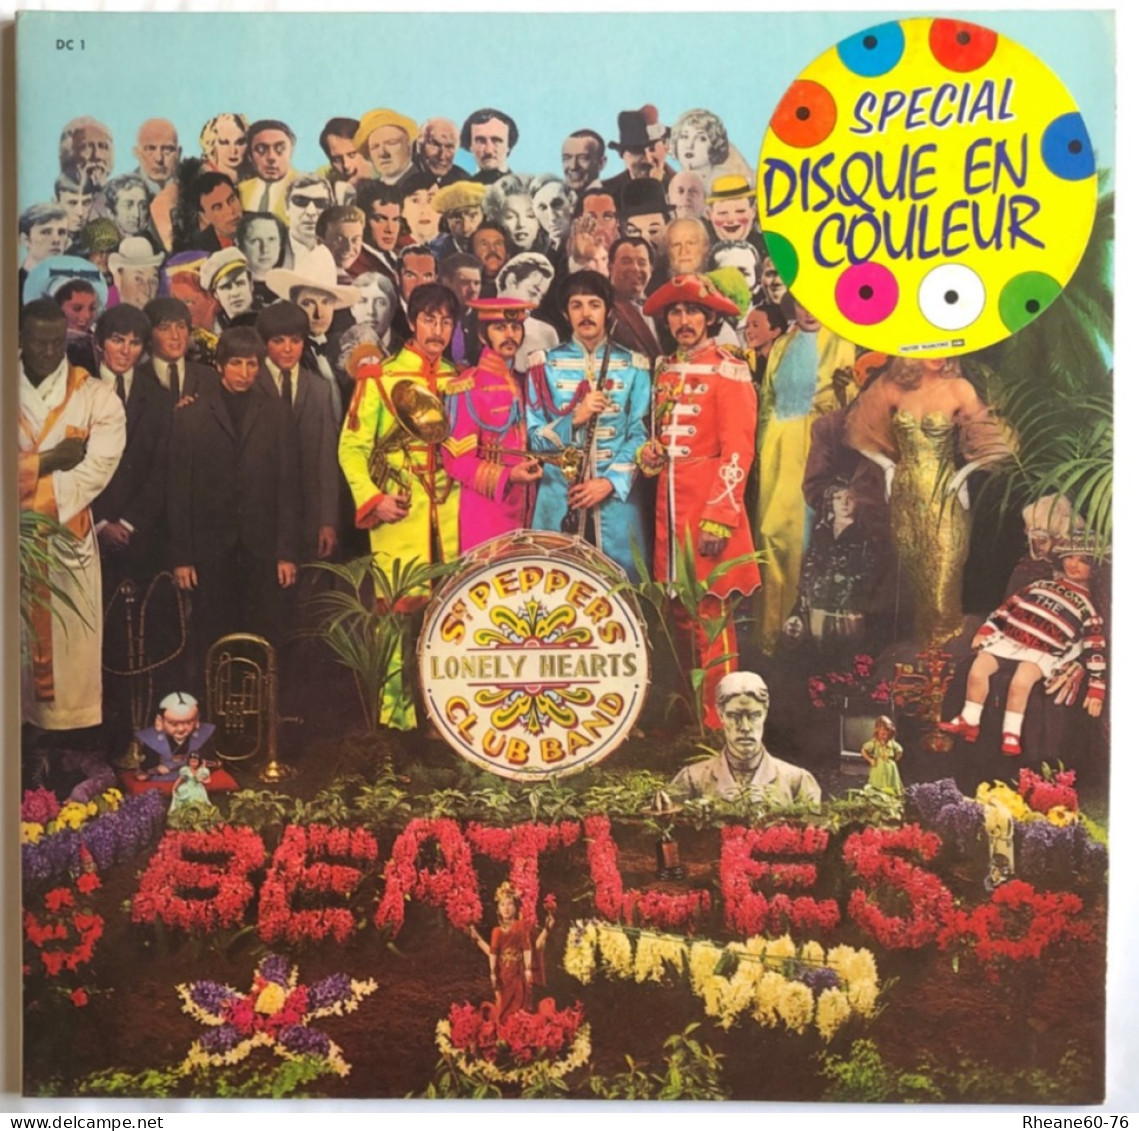 EMI Parlophone - C 066 04 177 - The Beatles - Disque Rouge - Sgt Pepper's Lonely Hearts Club Band - DC1 - Autres - Musique Anglaise